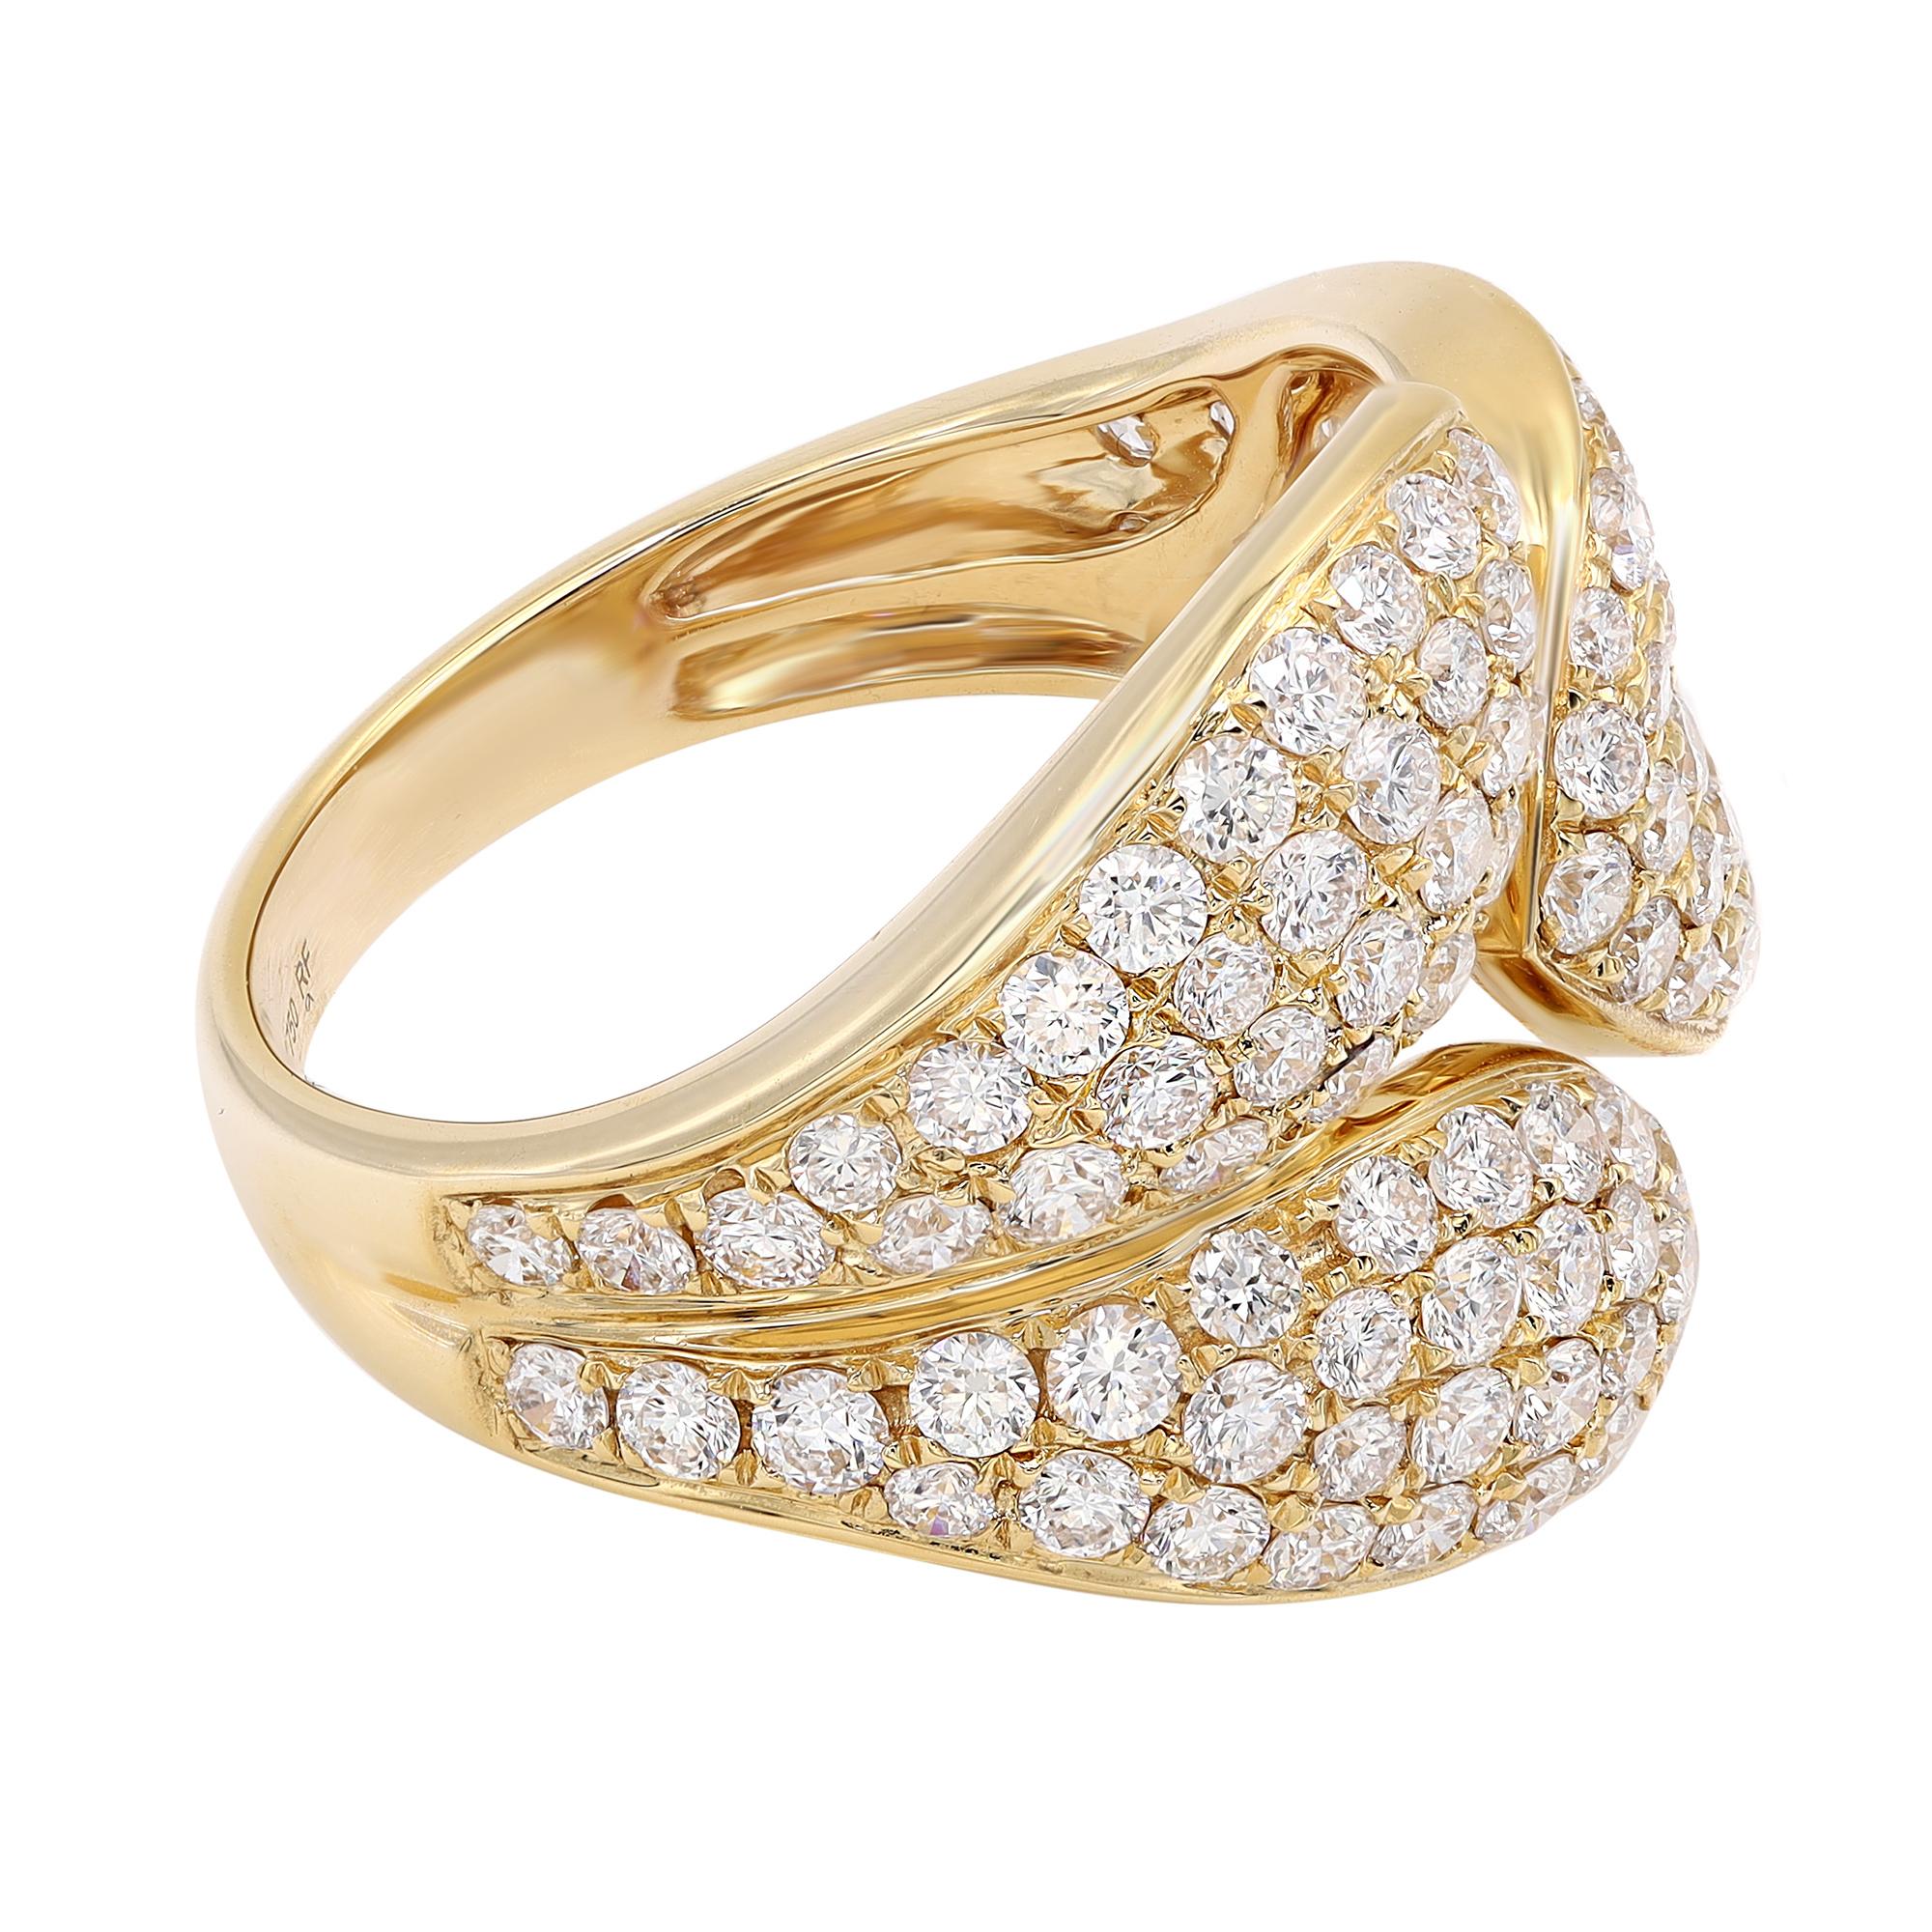 This luxurious 18k yellow gold ladies diamond ring showcases 2.00 carats of dazzling round cut diamonds in pave setting. Perfectly encrusted in a lustrous yellow gold leaves shank. Diamond Quality: G-H color, VS-SI clarity. Ring Size: 6.5. Total